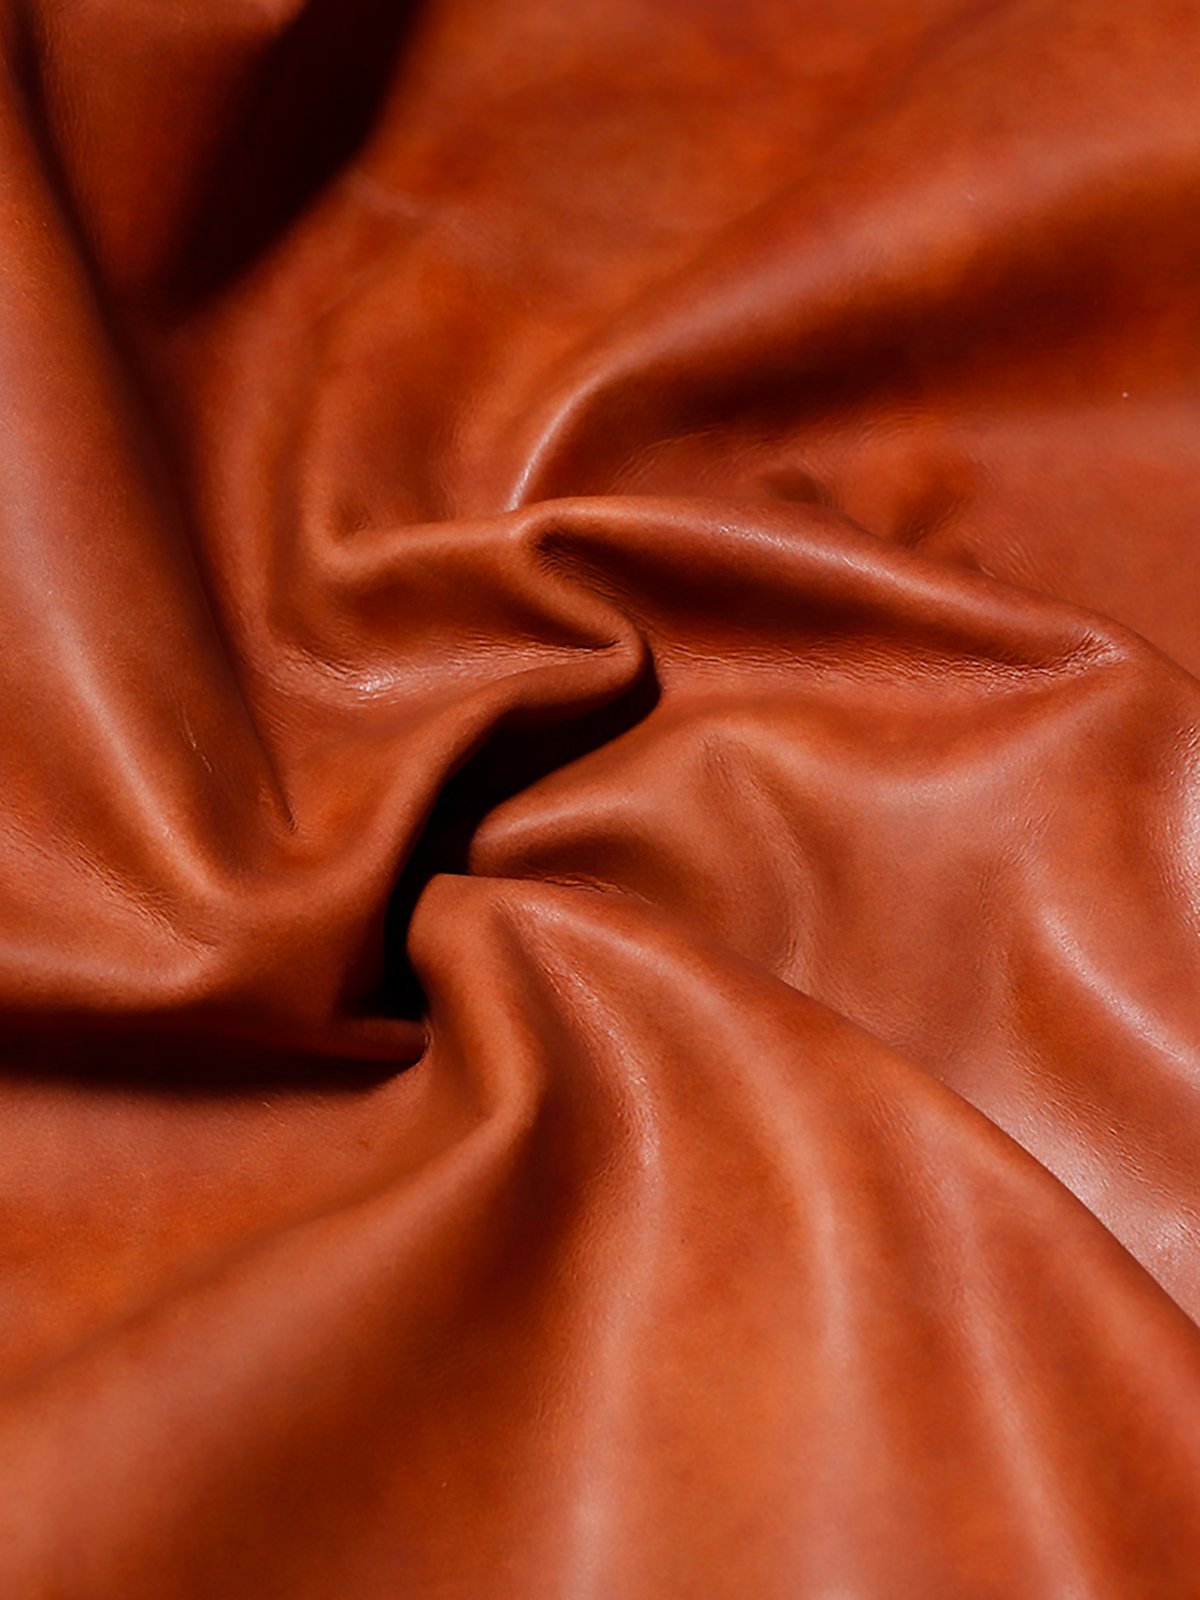 YouLeather, from prototype to production in a flash!